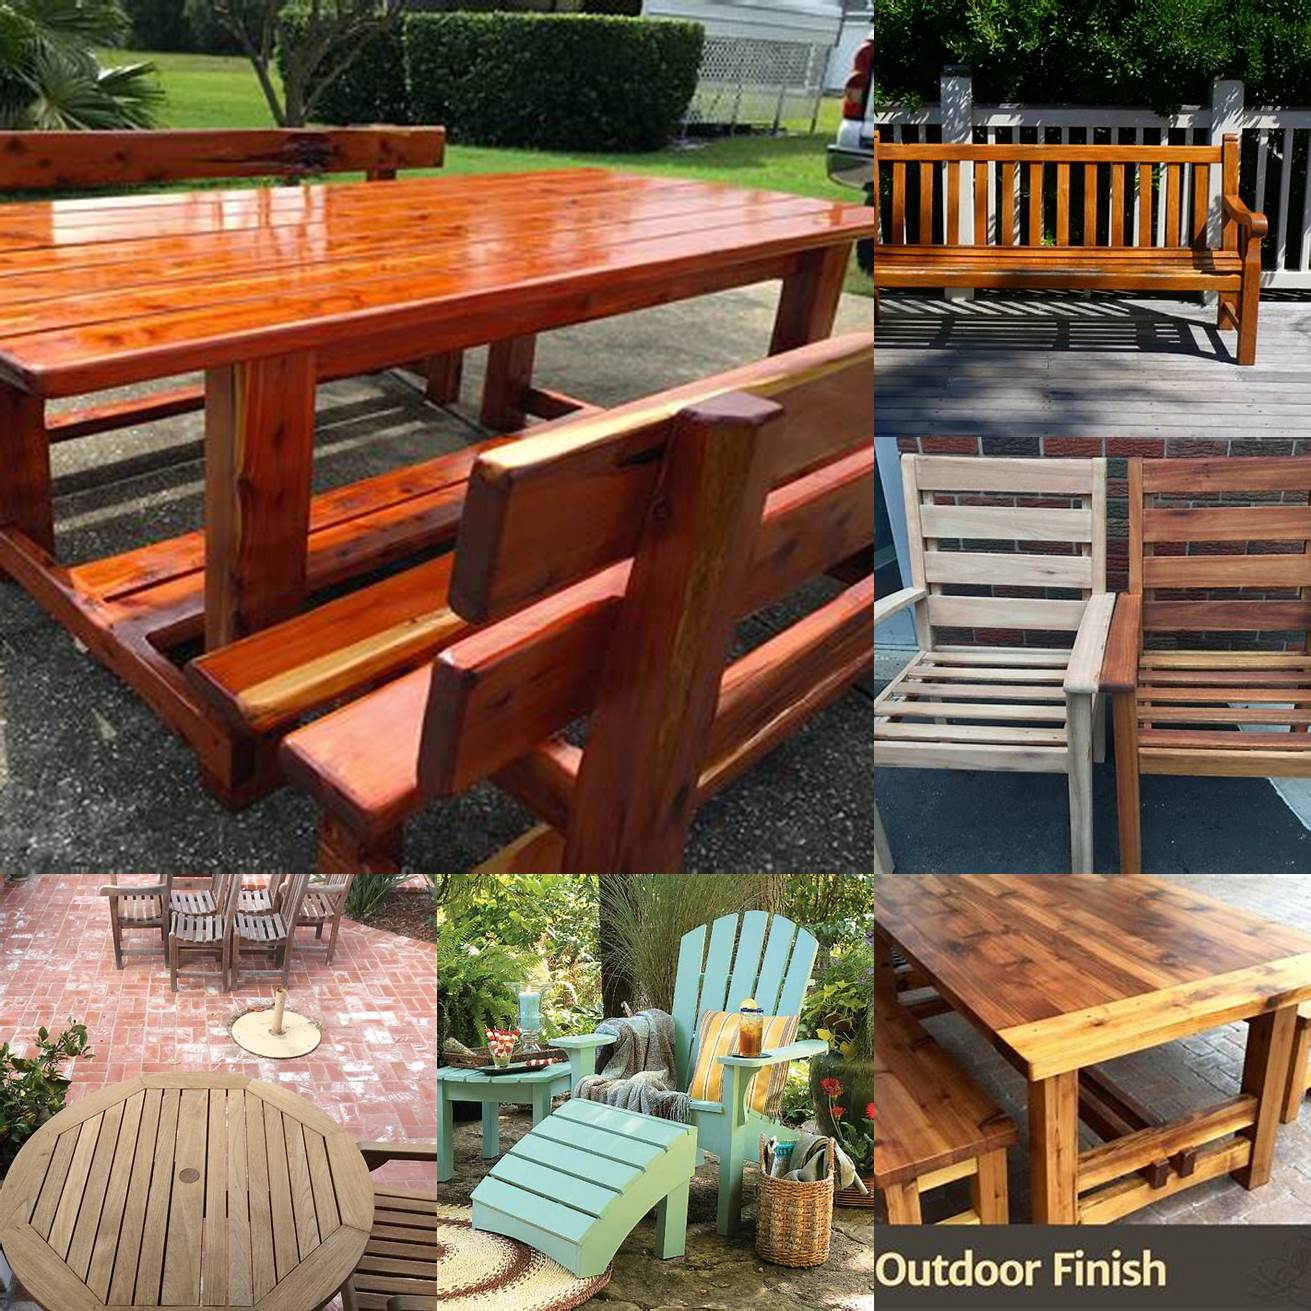 Examples of outdoor furniture finishing products